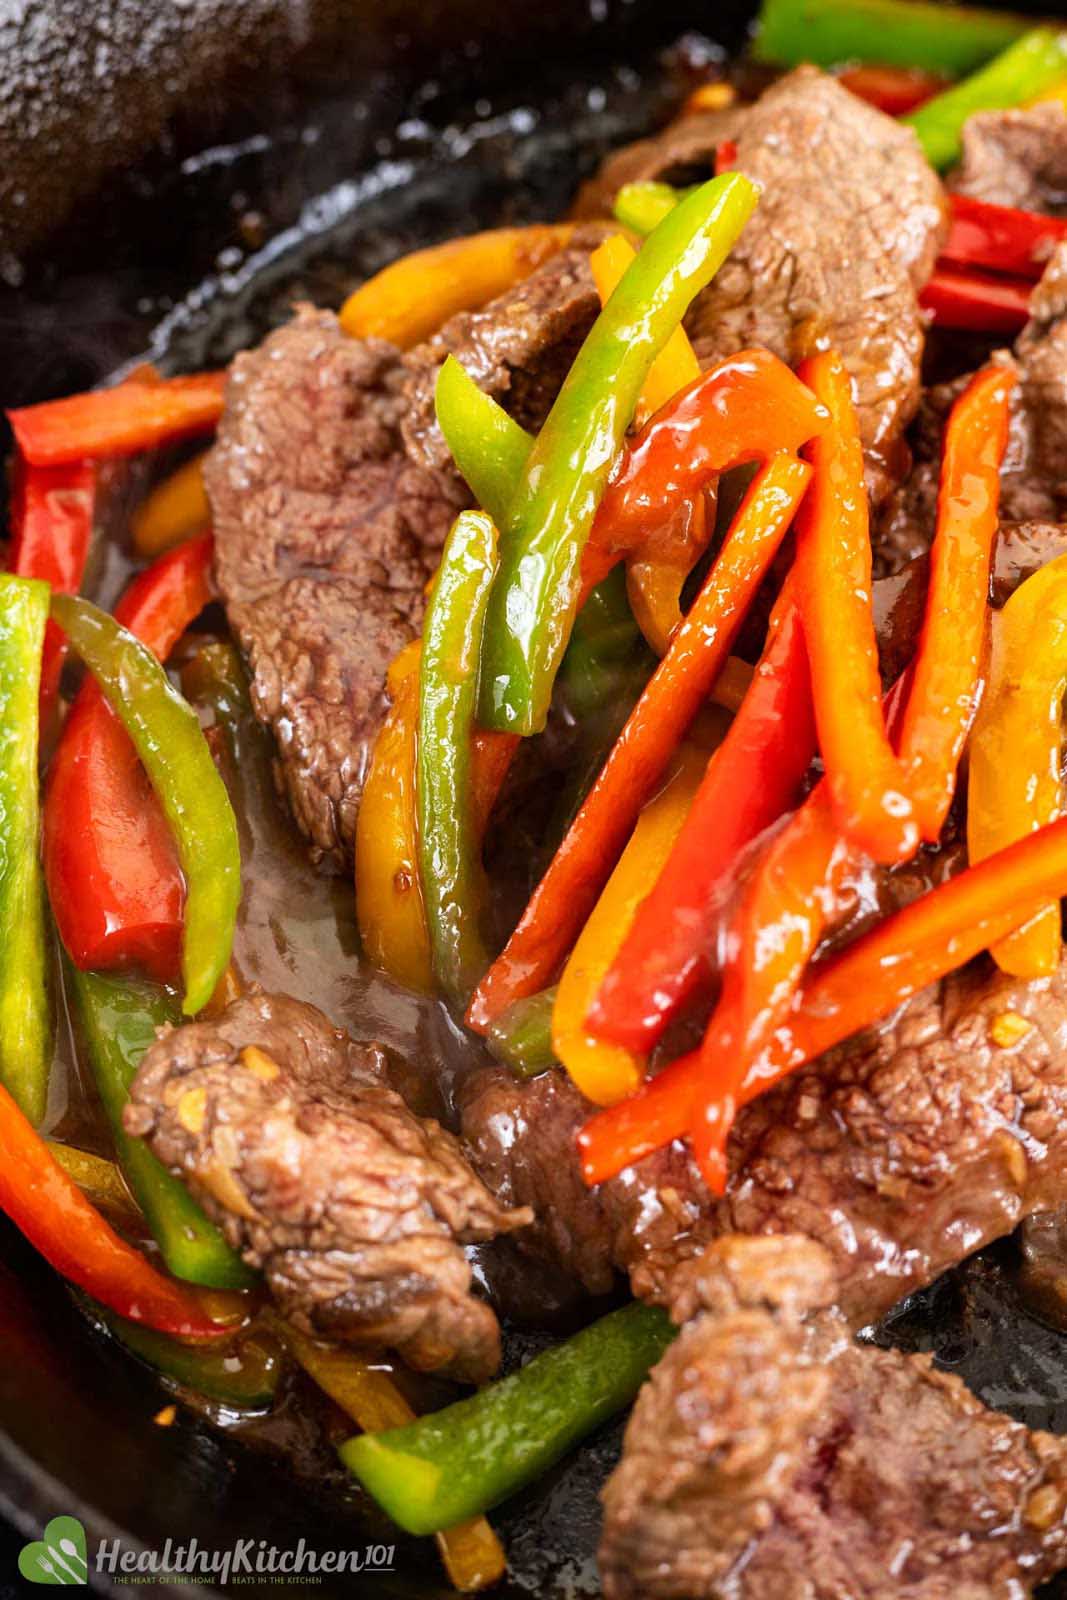 Chinese Pepper Steak Recipe - Your Favorite Takeout Made Healthier